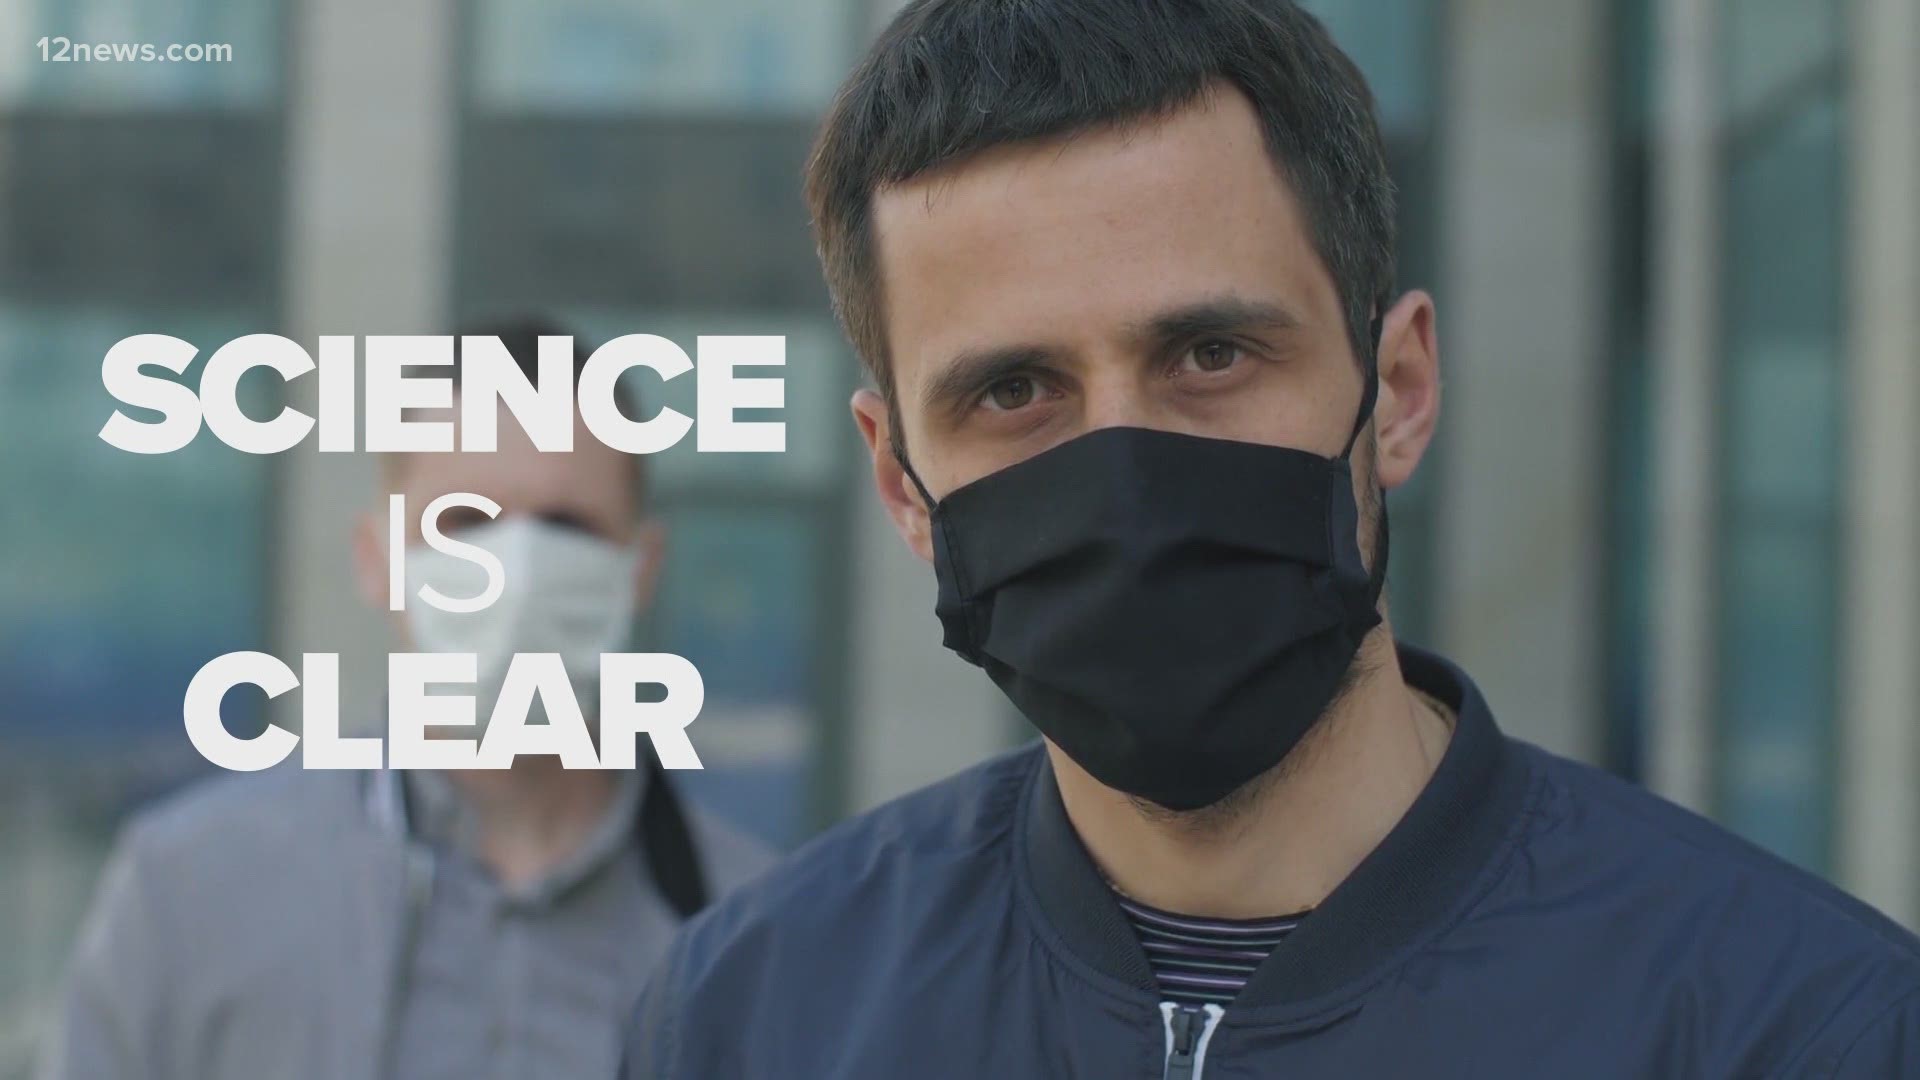 The science is clear, masks are one of the best tools we have to control the spread of the coronavirus. The mask serves as a physical barrier and blocks droplets.